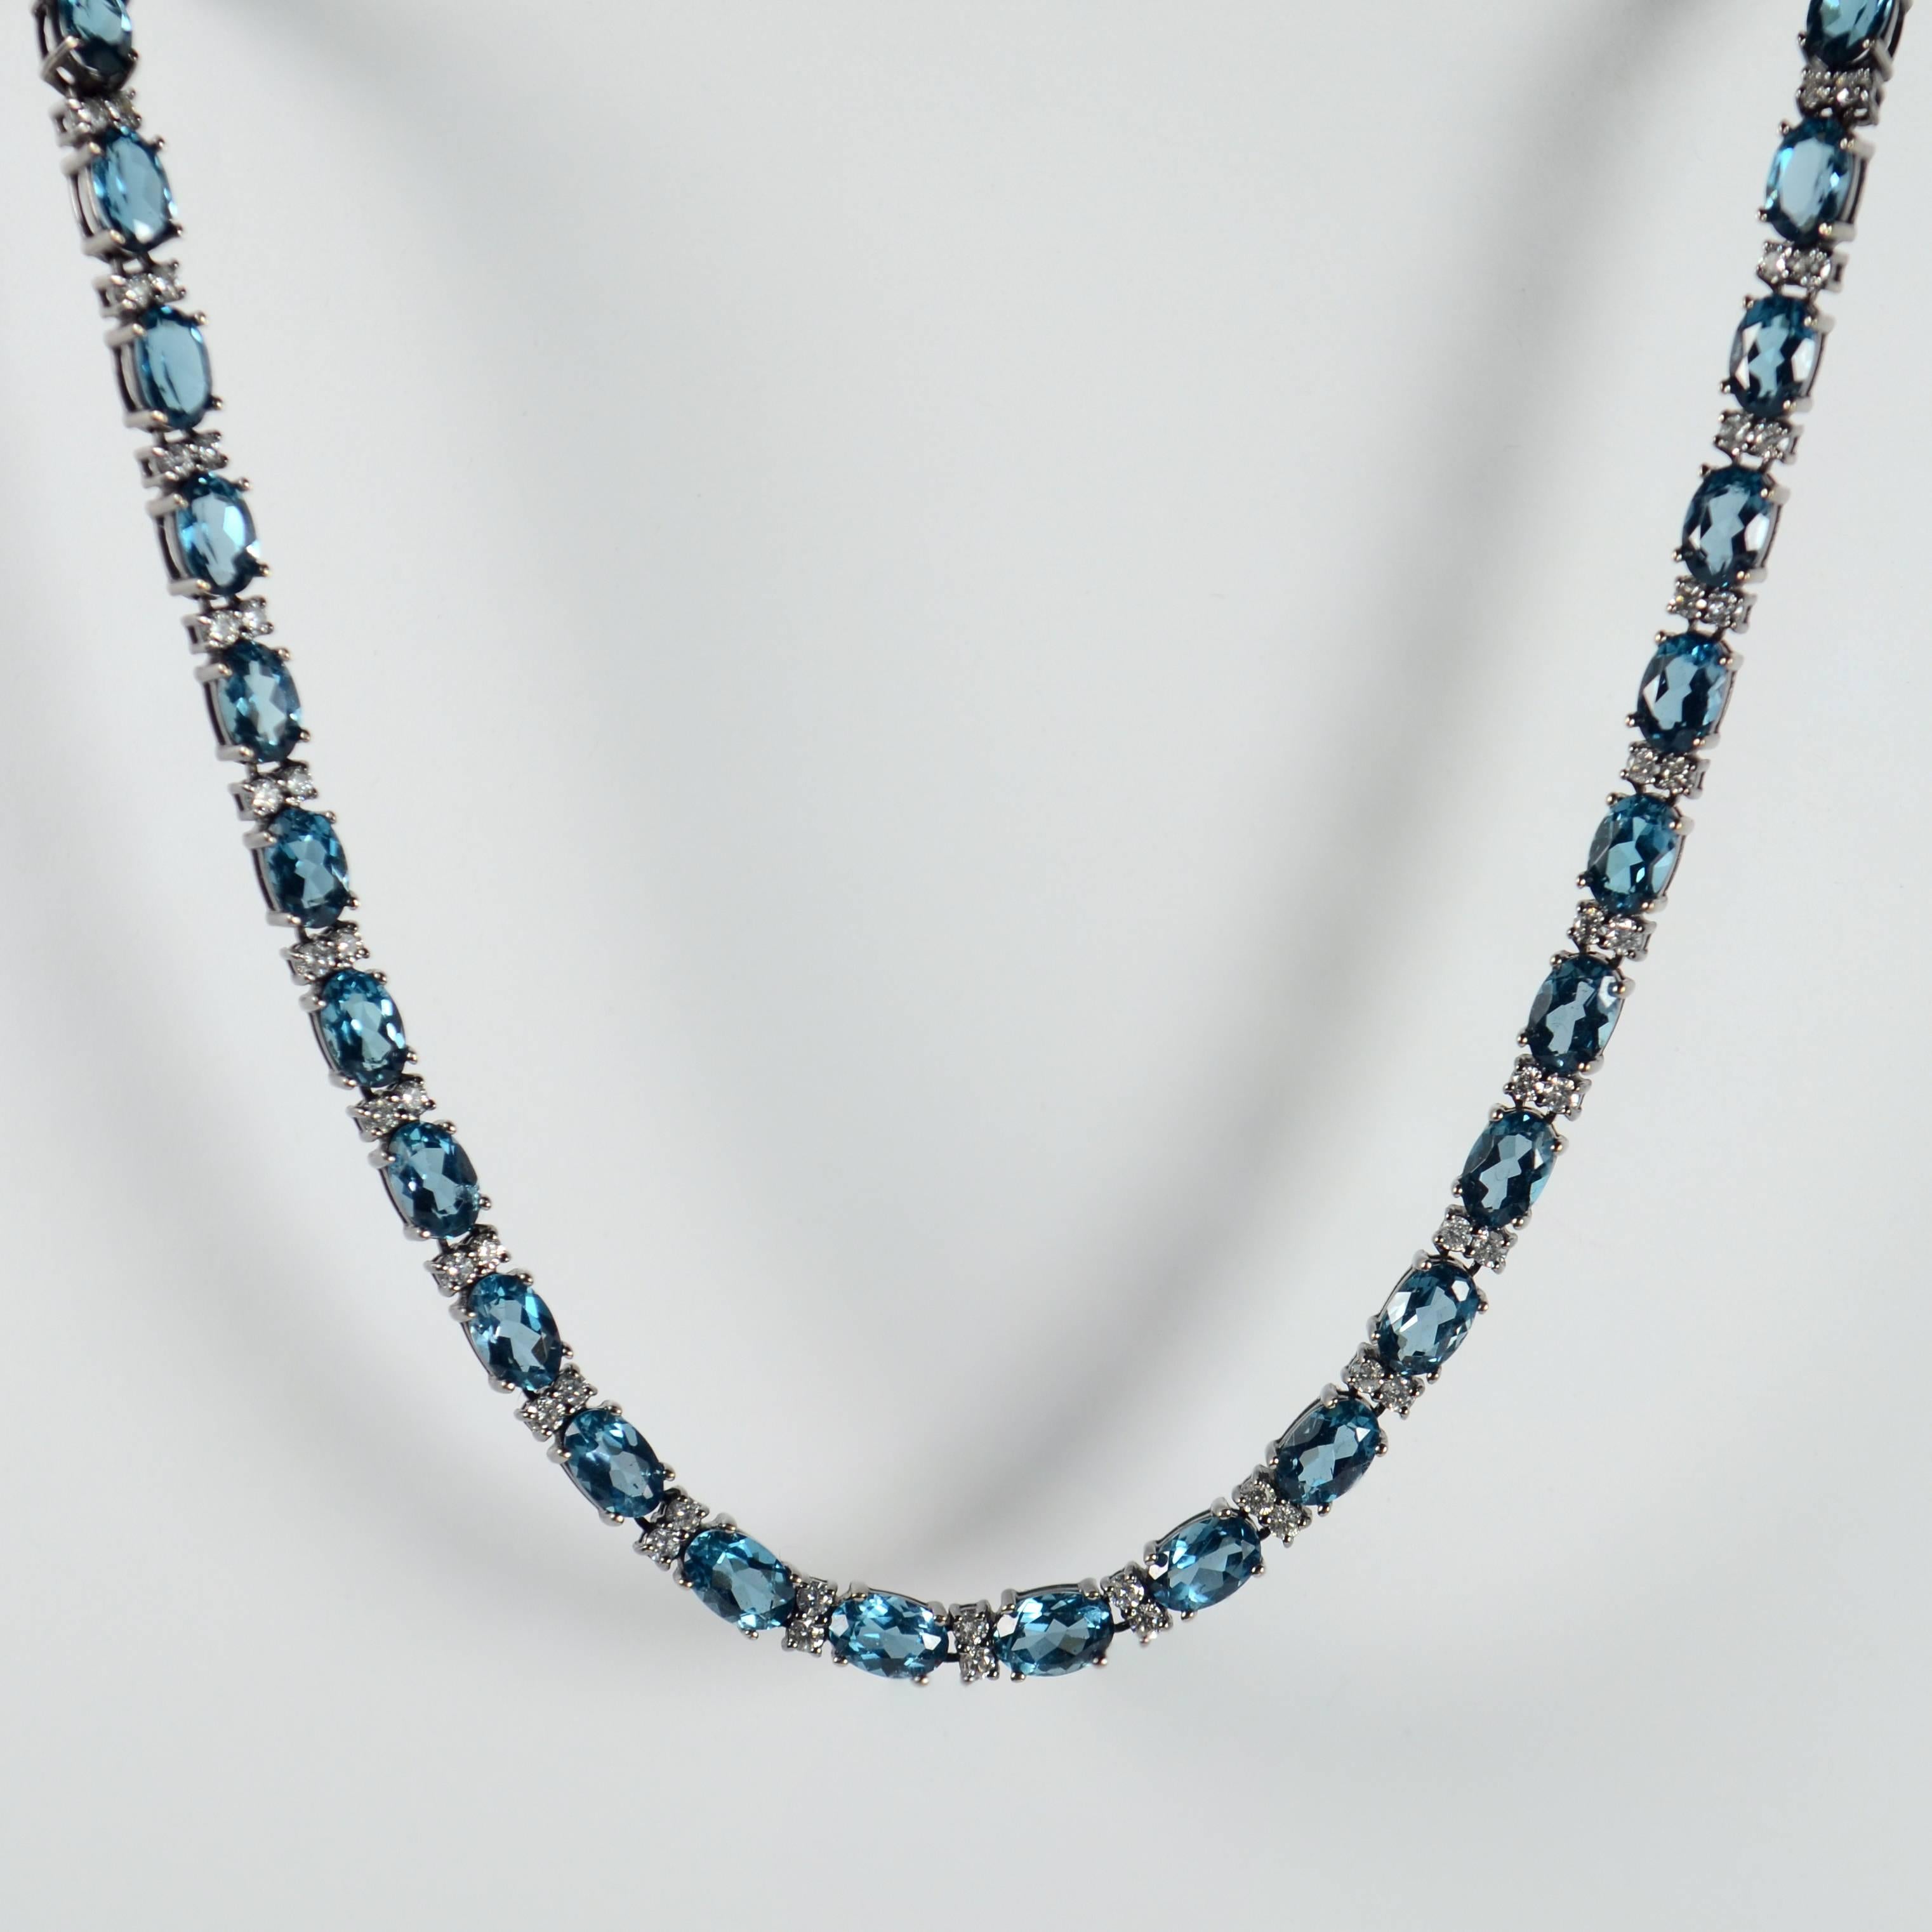 A sparklingly smart necklace in blackened gold set with 50 oval brilliant-cut blue topaz, each interspaced by 2 brilliant-cut diamonds (100 in total). The gemstones are mounted in blackened white gold for a contemporary chic feel to this glittering